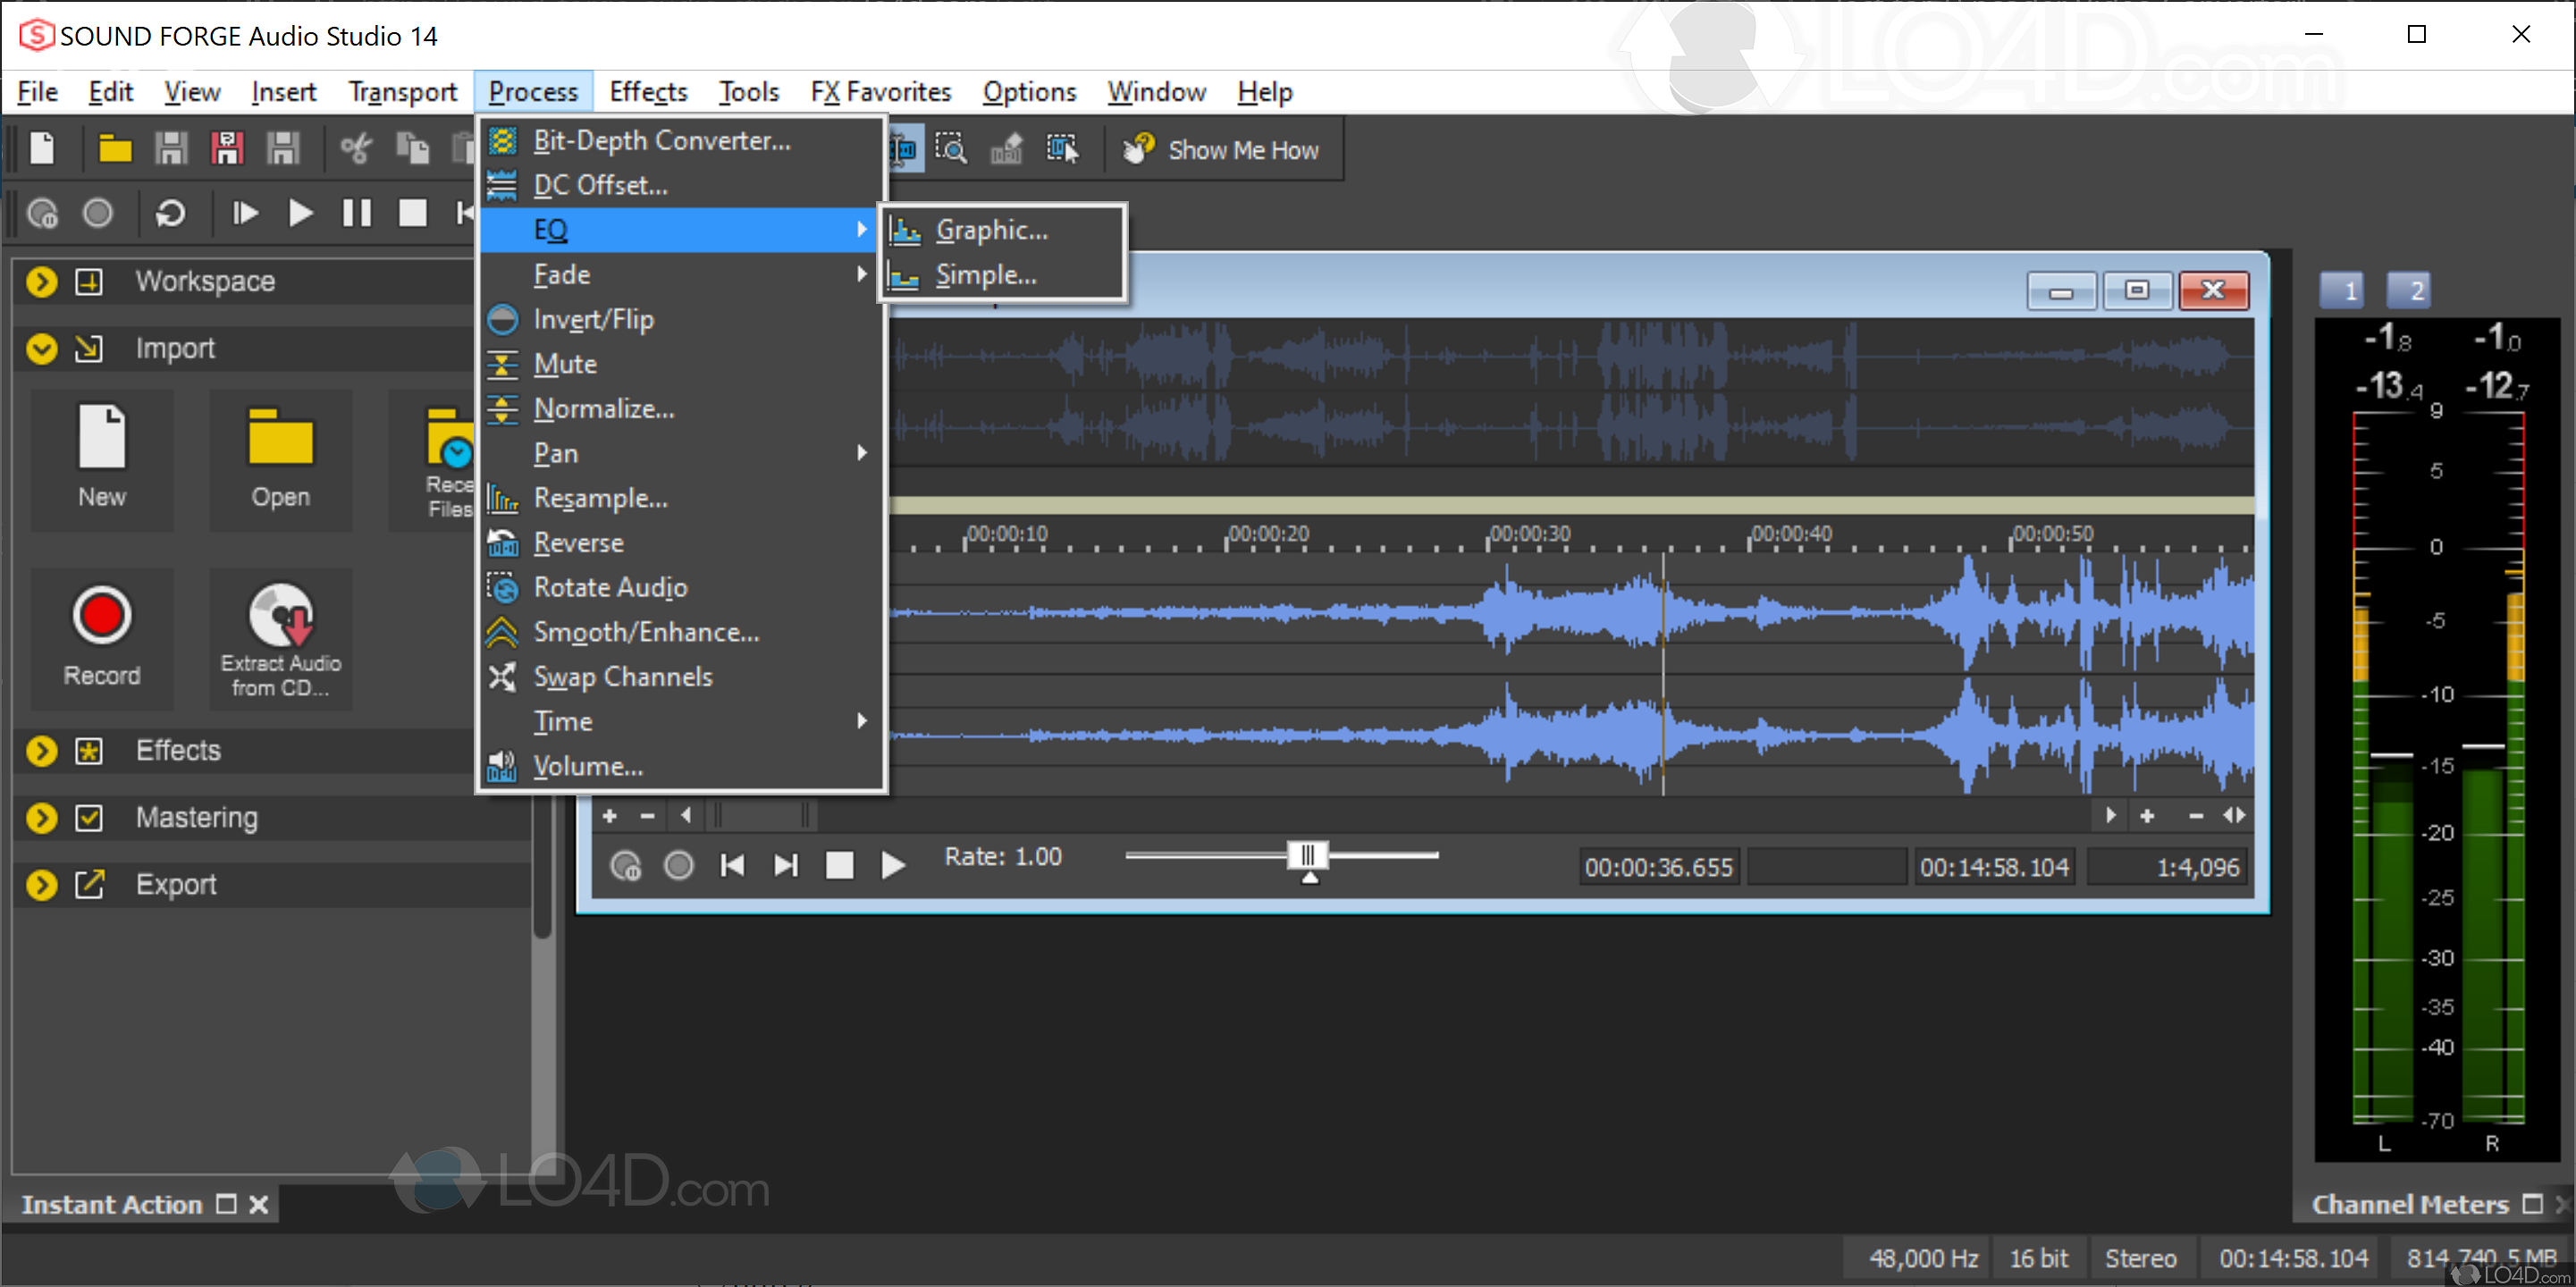 download sound forge free version